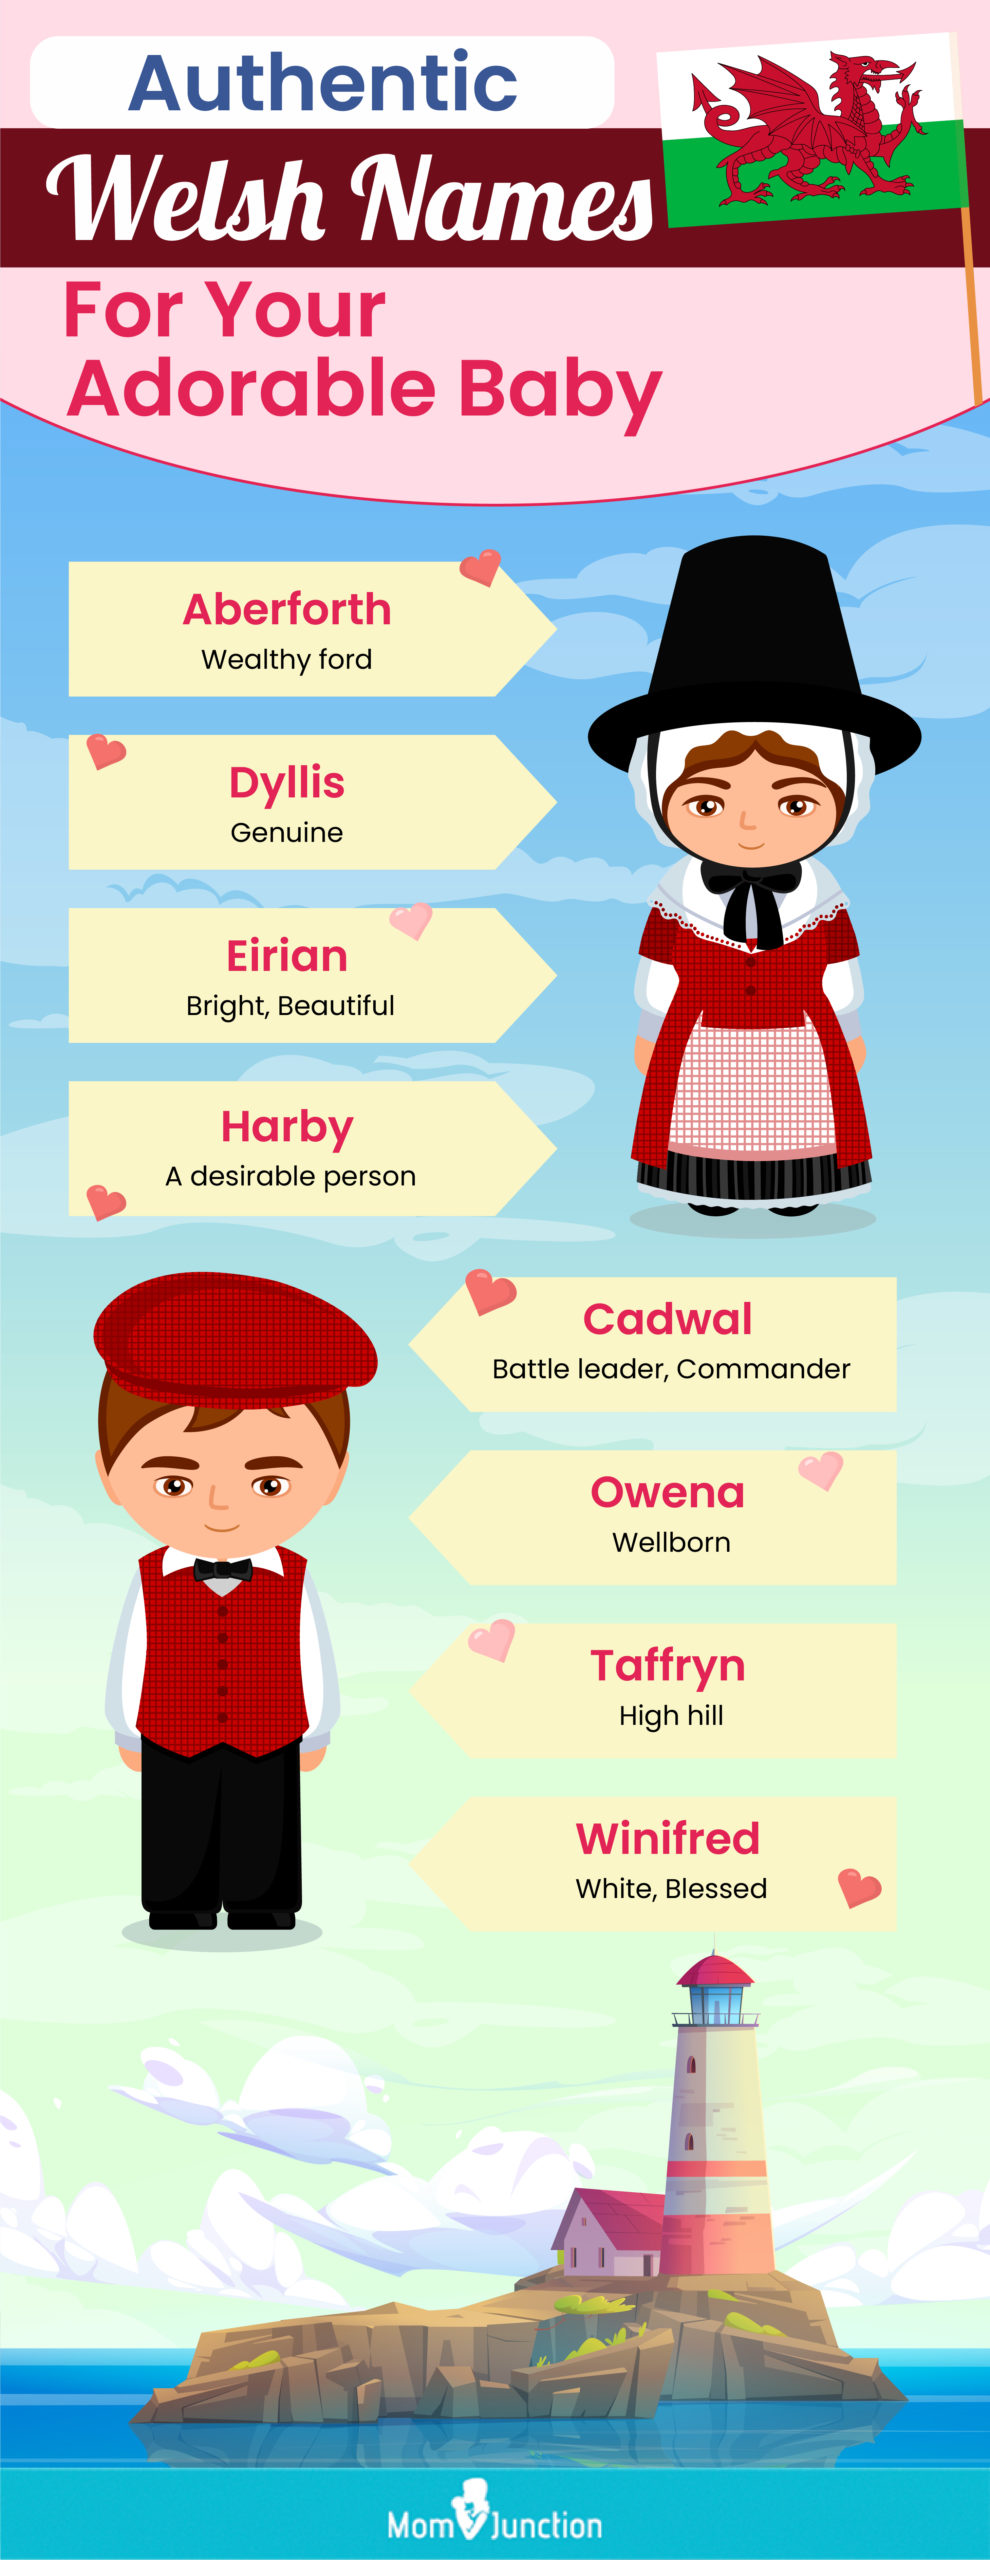 authentic welsh names for your adorable baby (infographic)